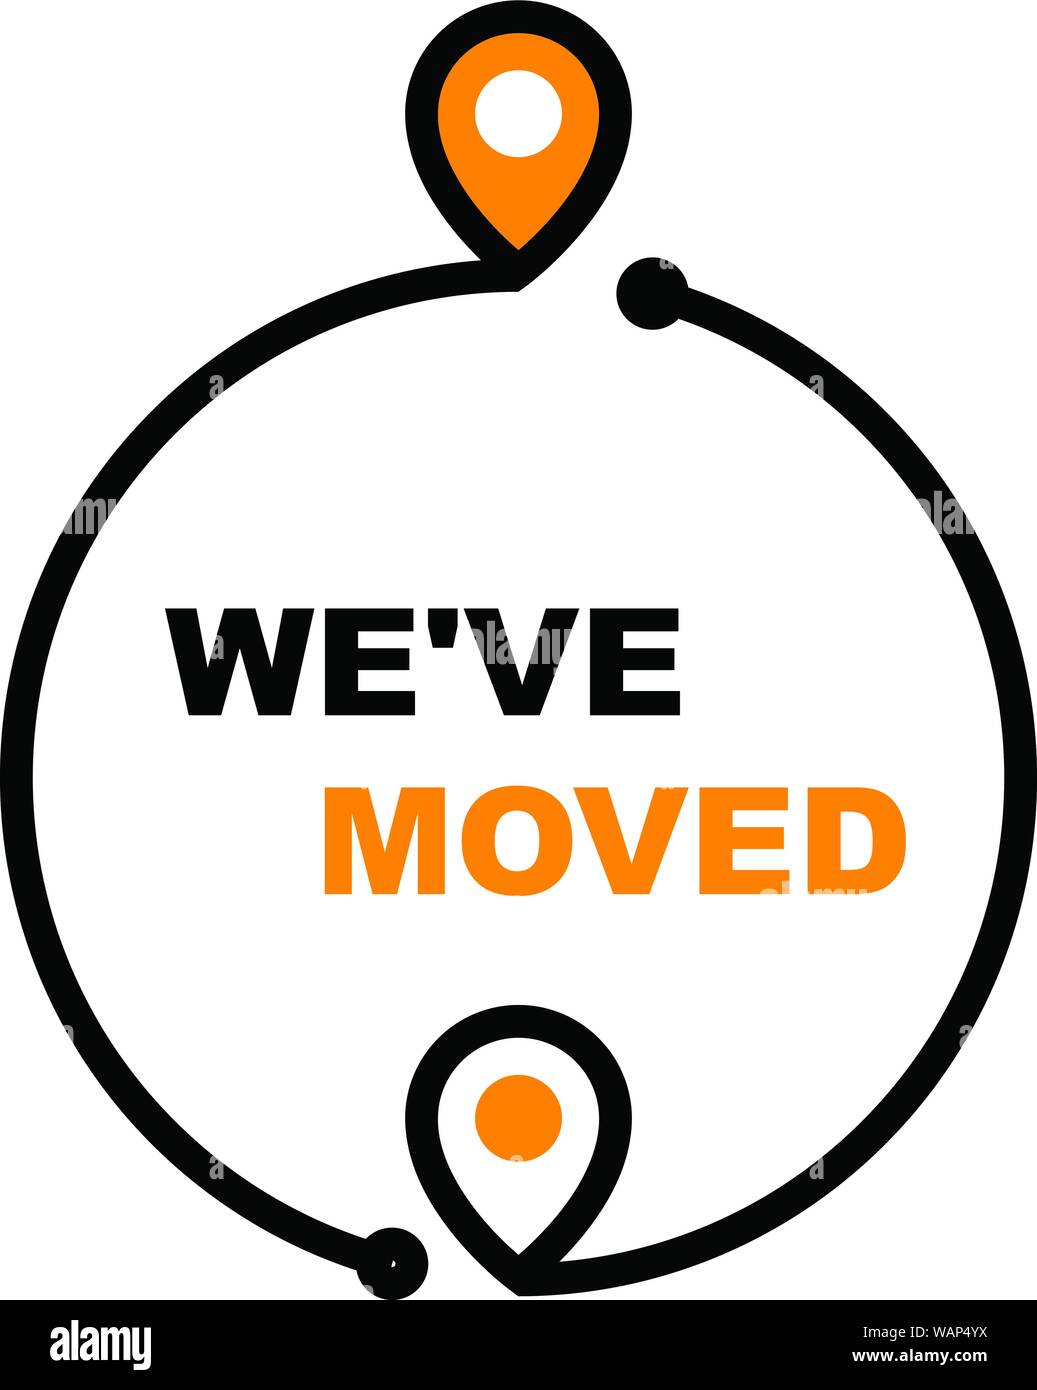 We have moved - office relocation icon, business transfer and moving sign Stock Vector